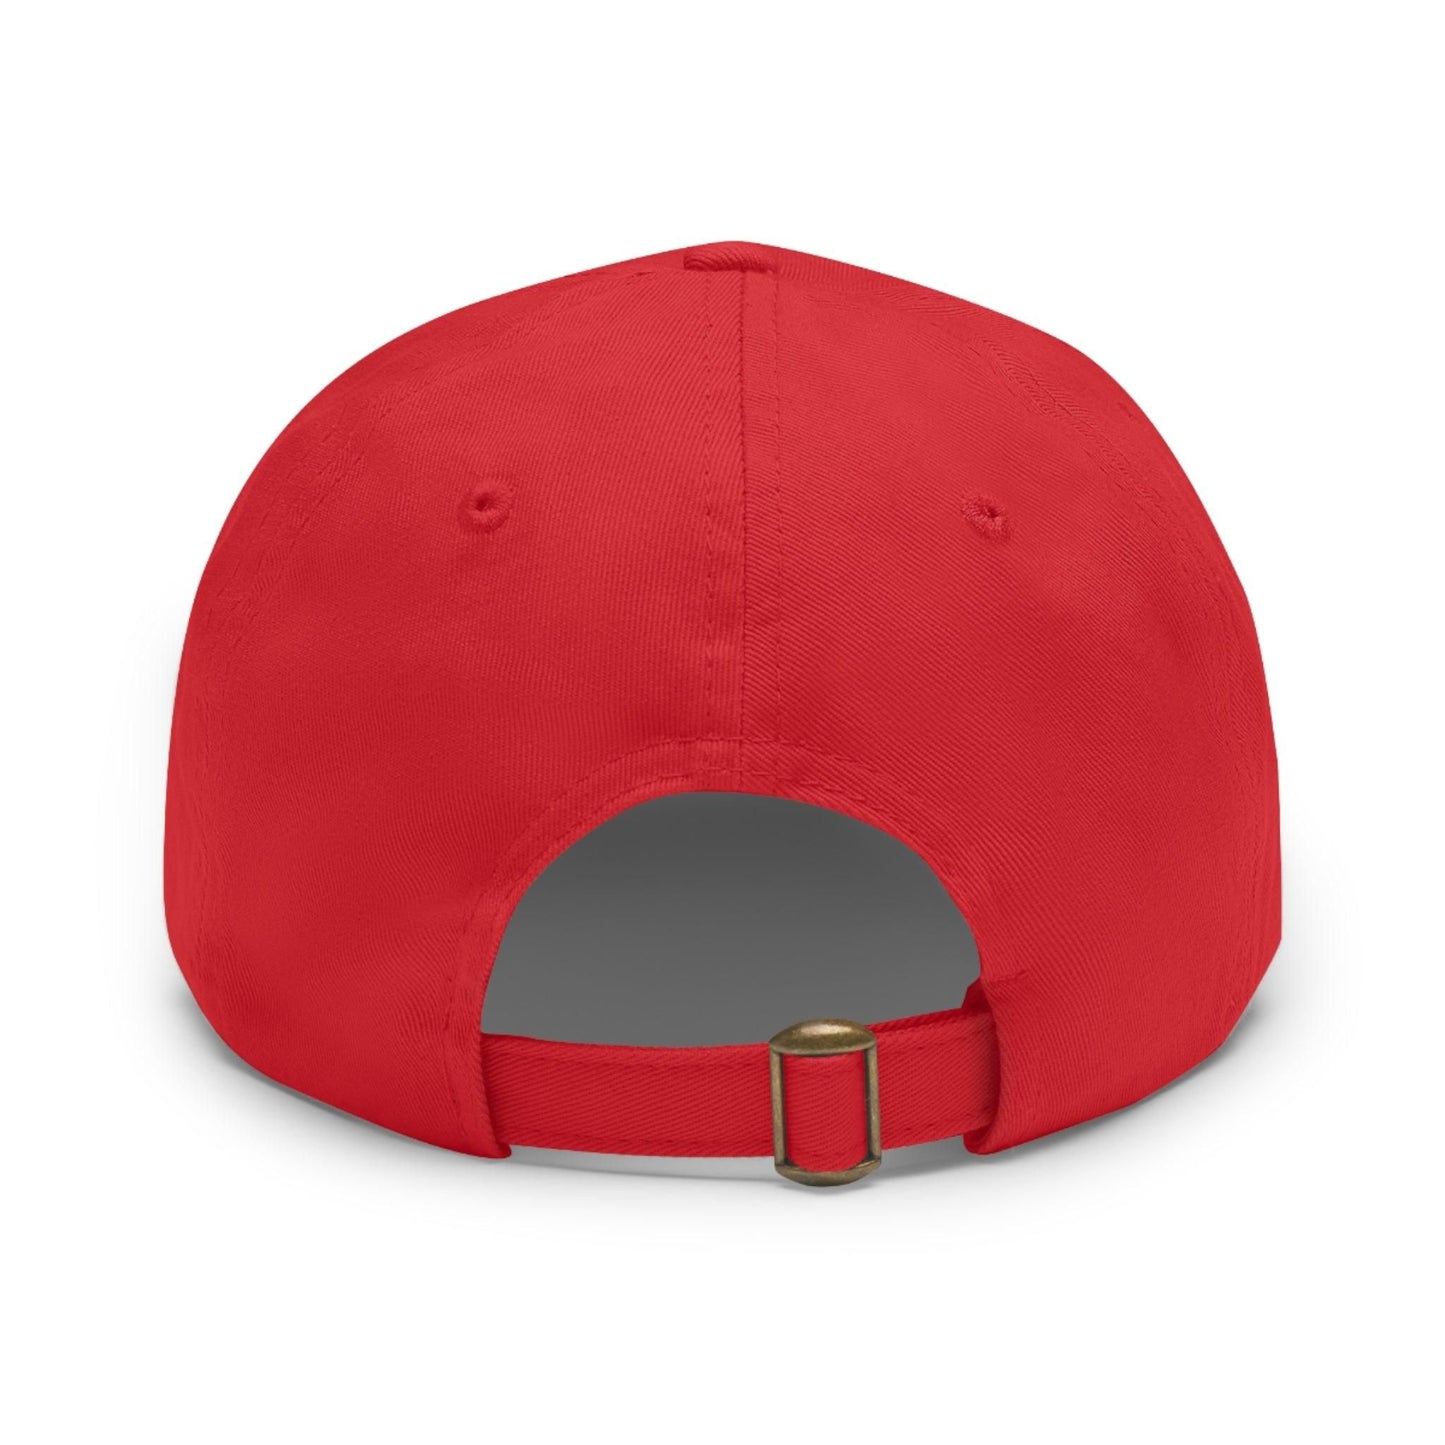 Captain Baseball Hat with Leather Patch Cap   